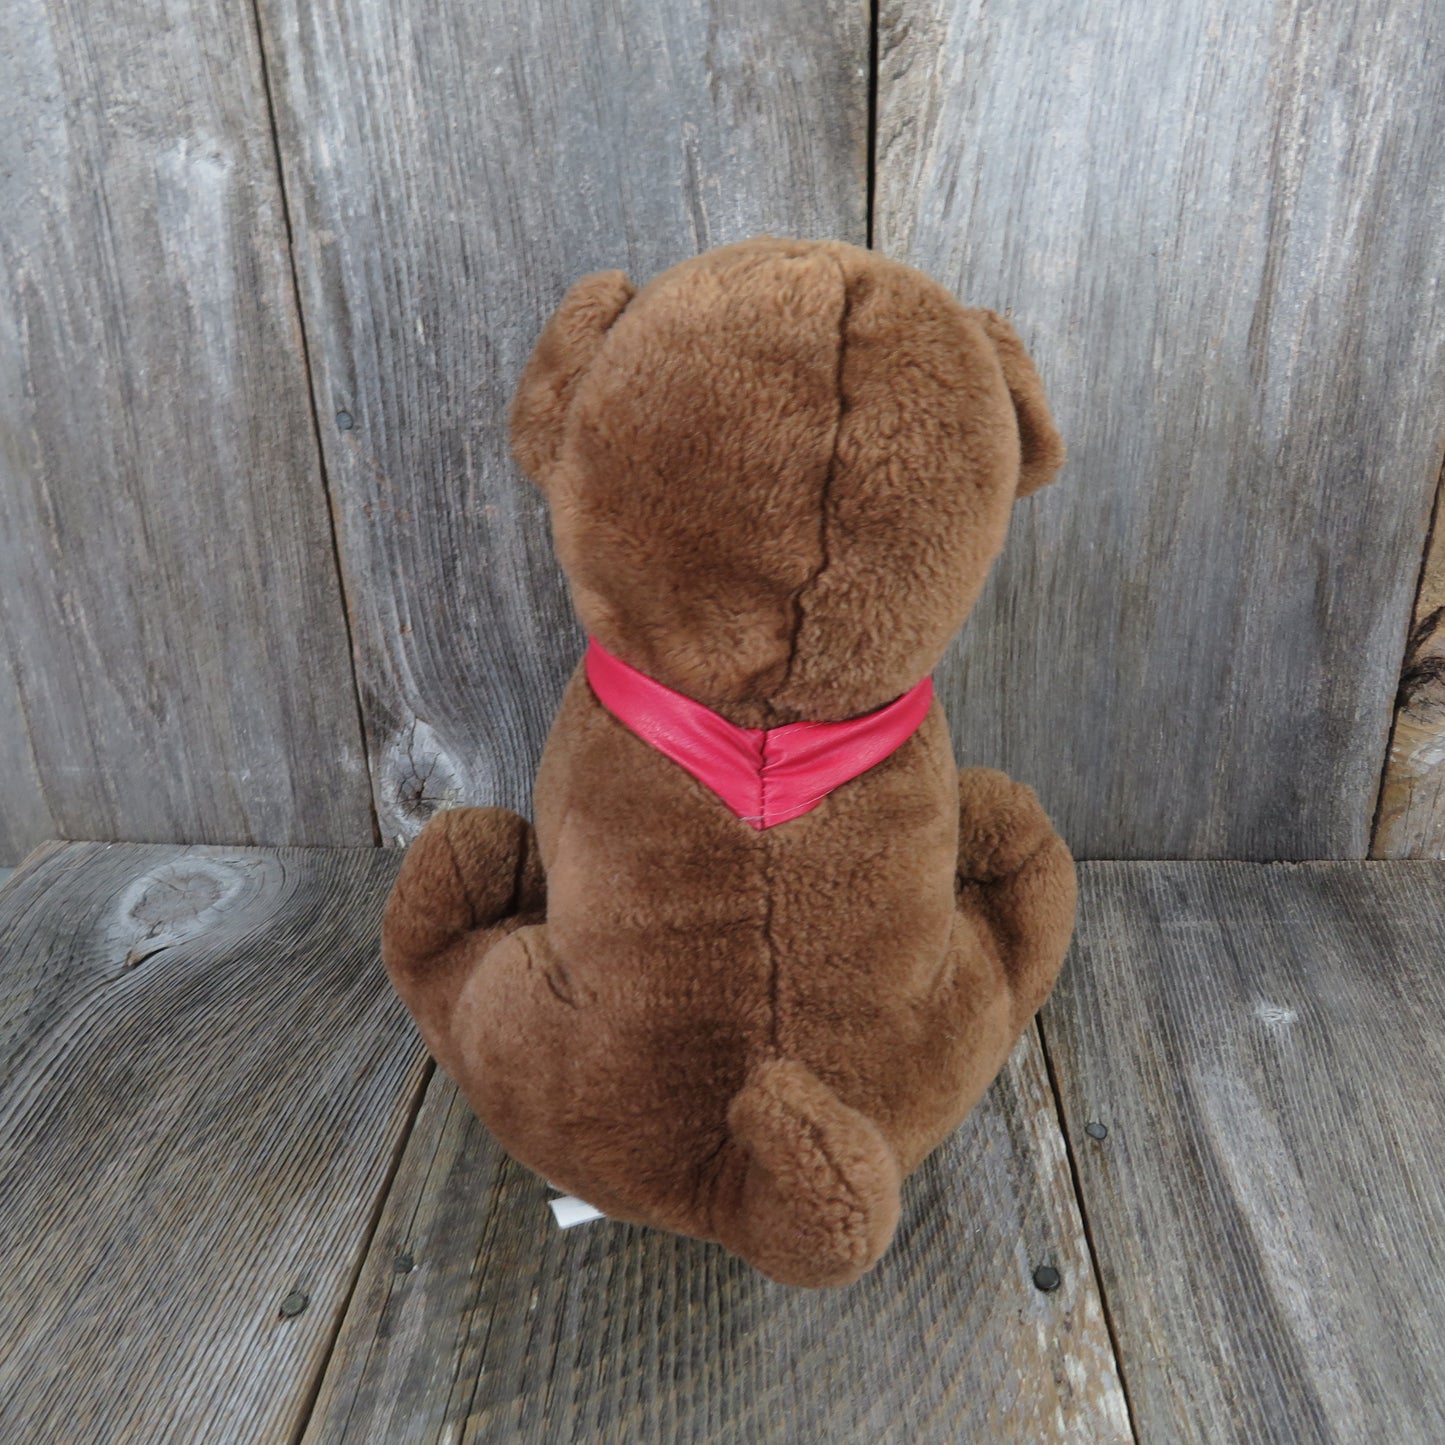 Vintage Dog Shar Pei Puppy Plush Brown Stuffed Animal Wrinkles Play by Play Tongue Red Collar - At Grandma's Table